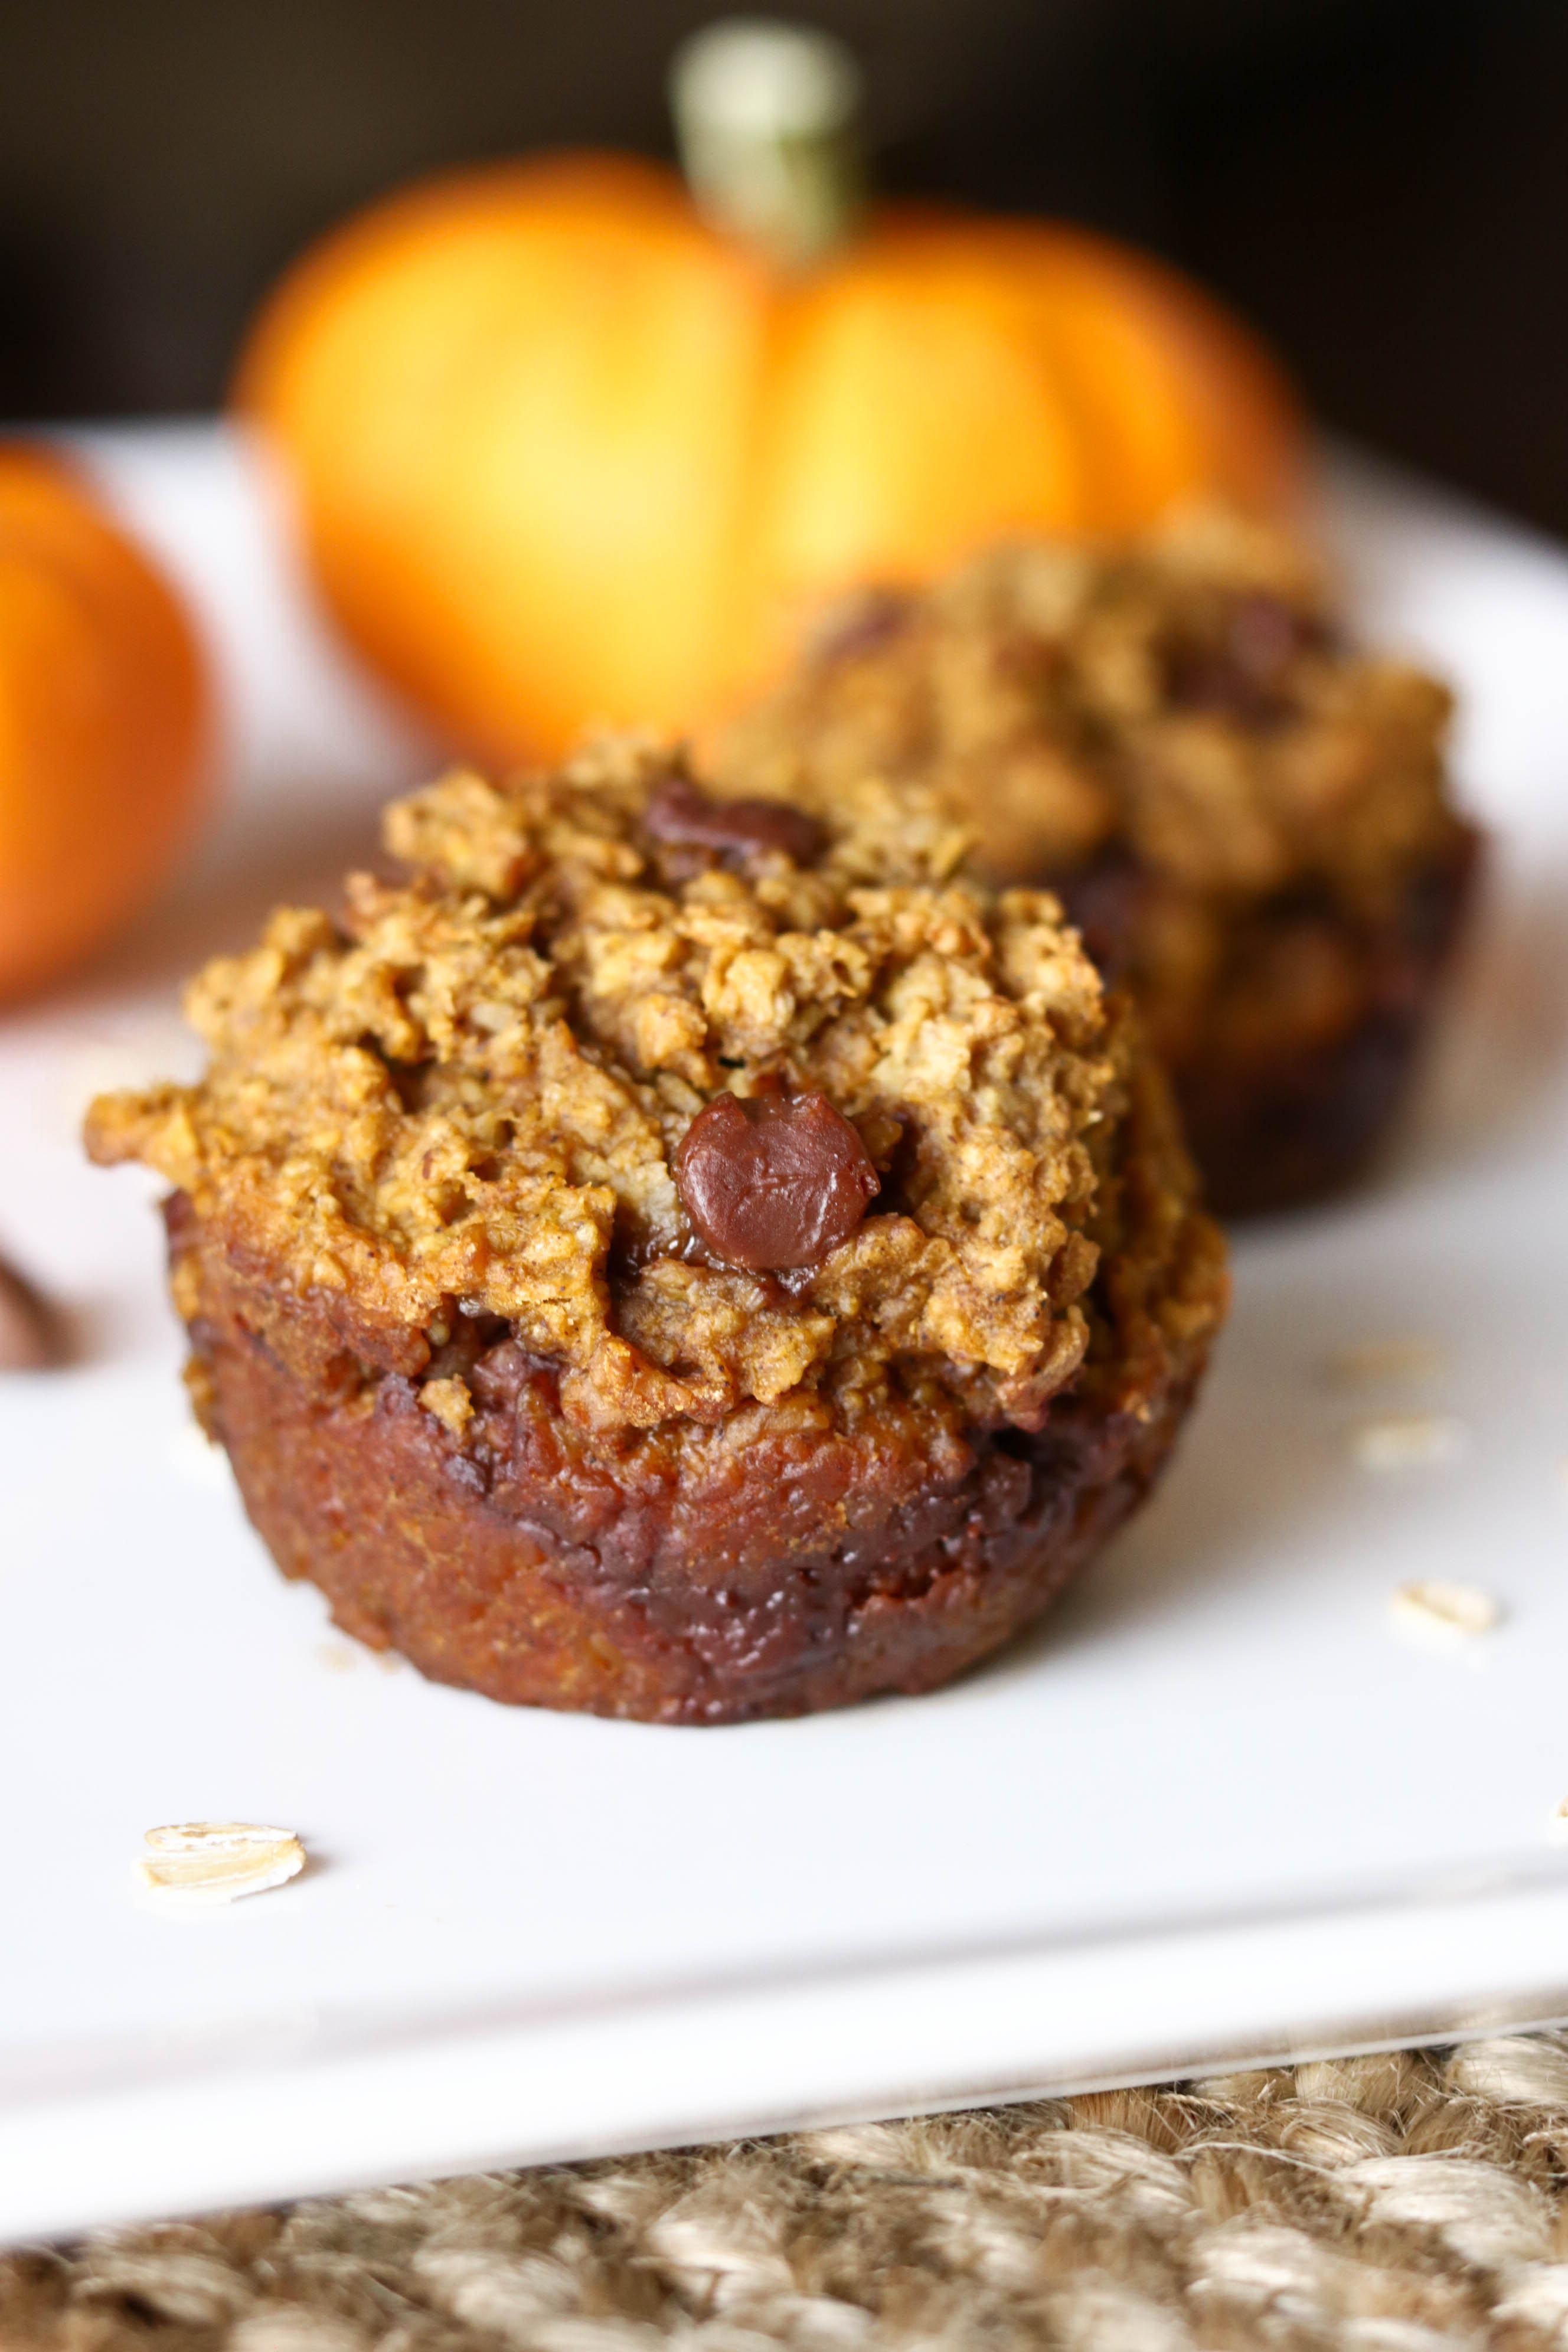 Gluten Free, Dairy Free, Paleo and Faster Way to Fat Loss friendly Healthy Pumpkin Muffins with Chocolate Chips.